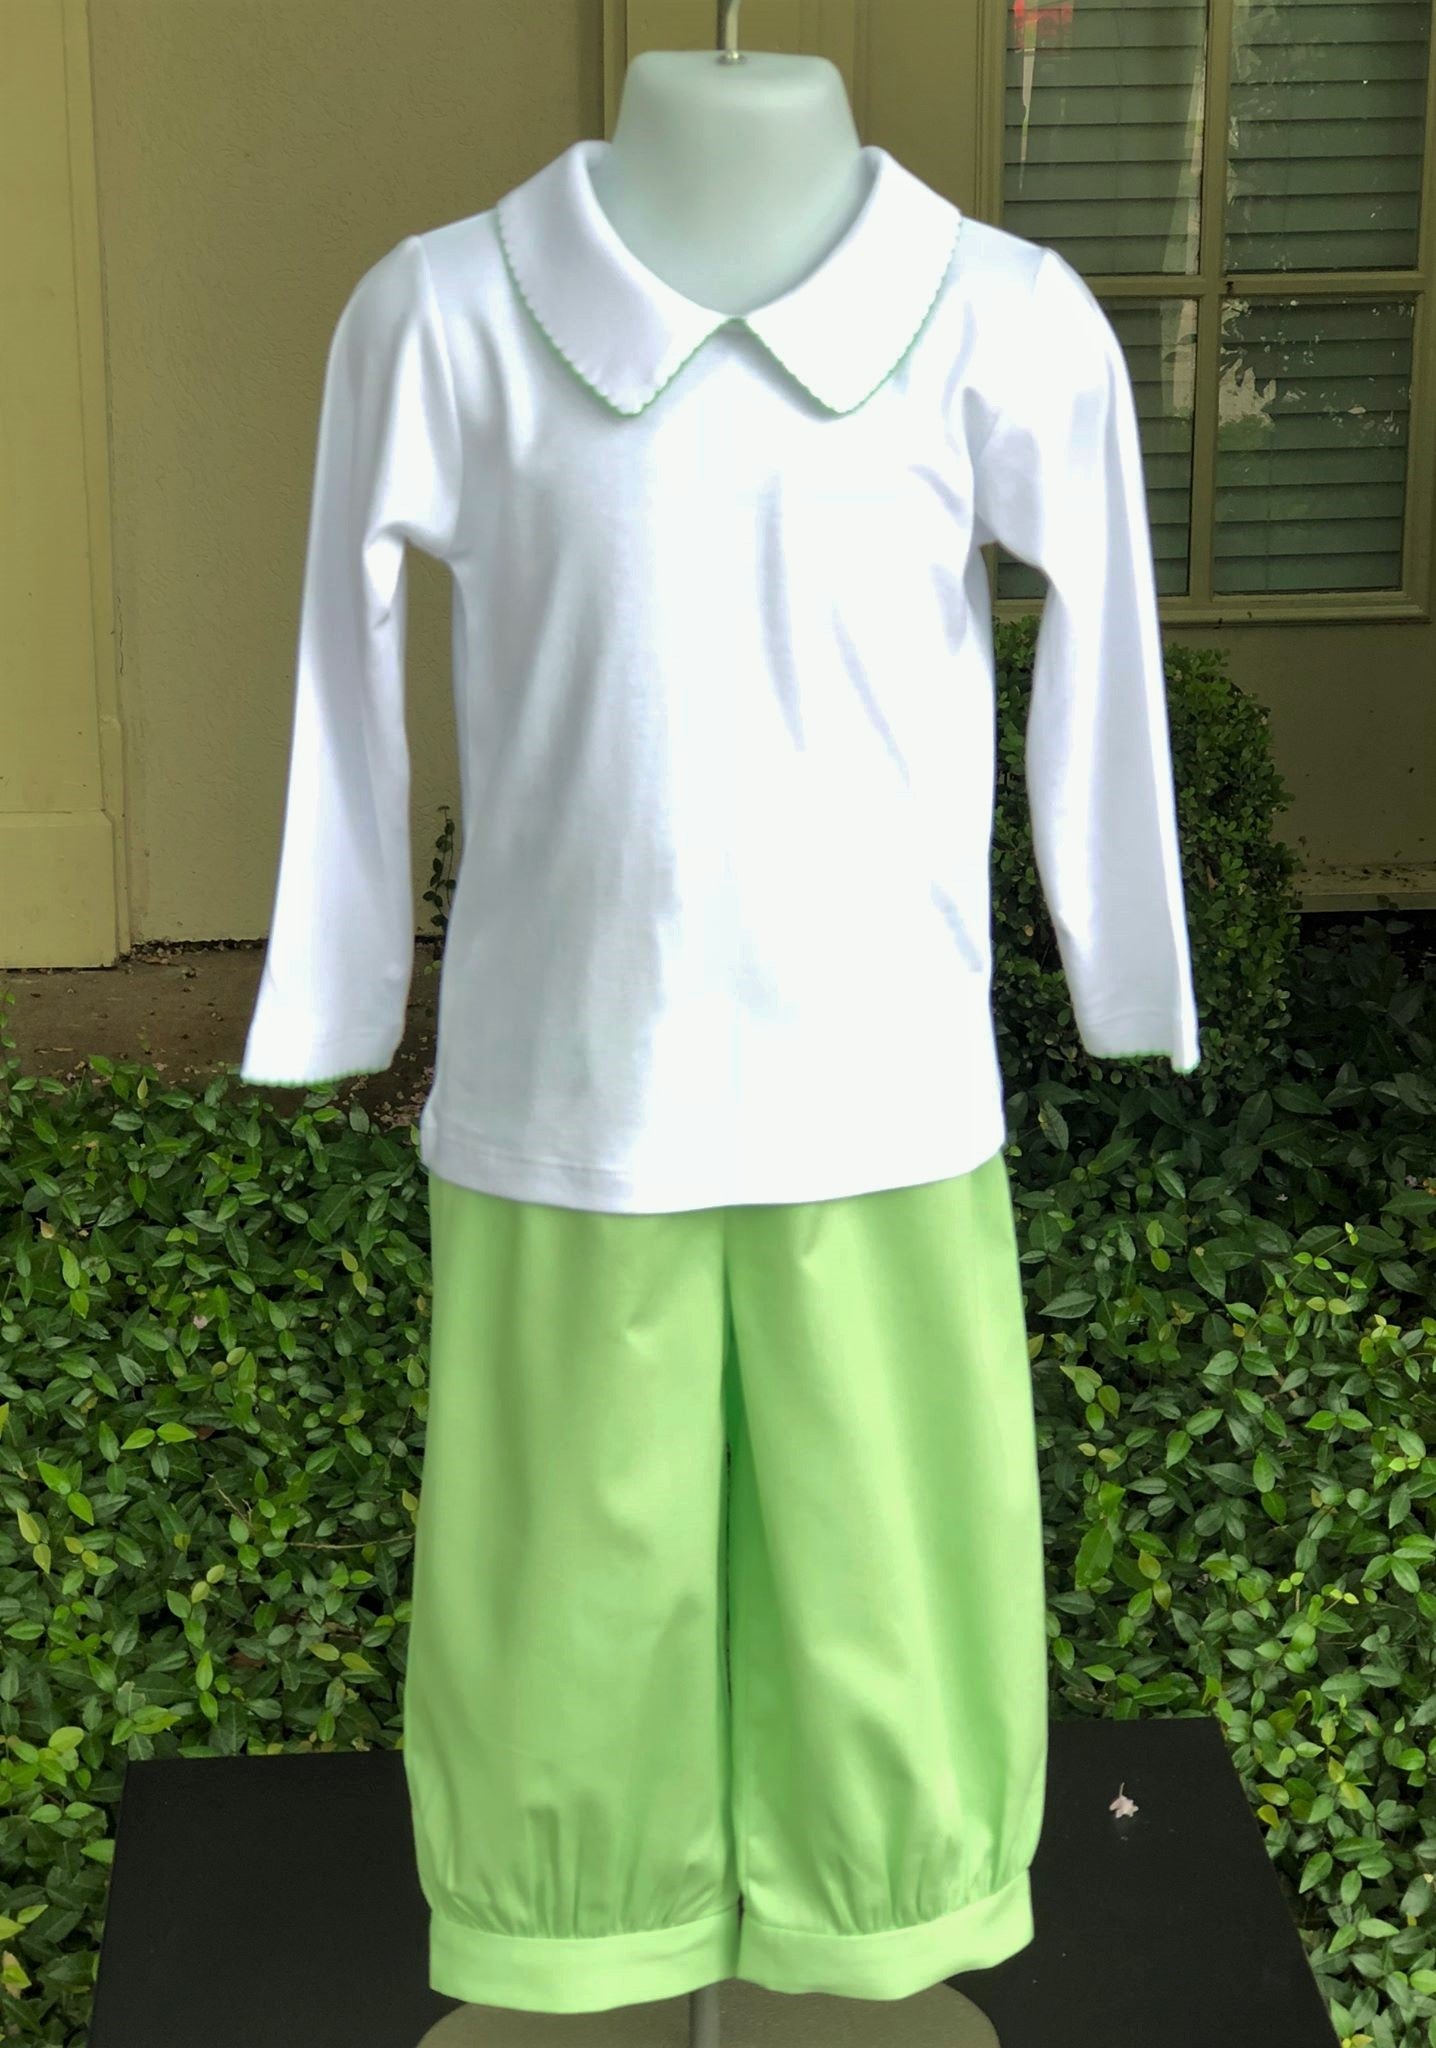 Pointed collar shirt with apple green picot trim*